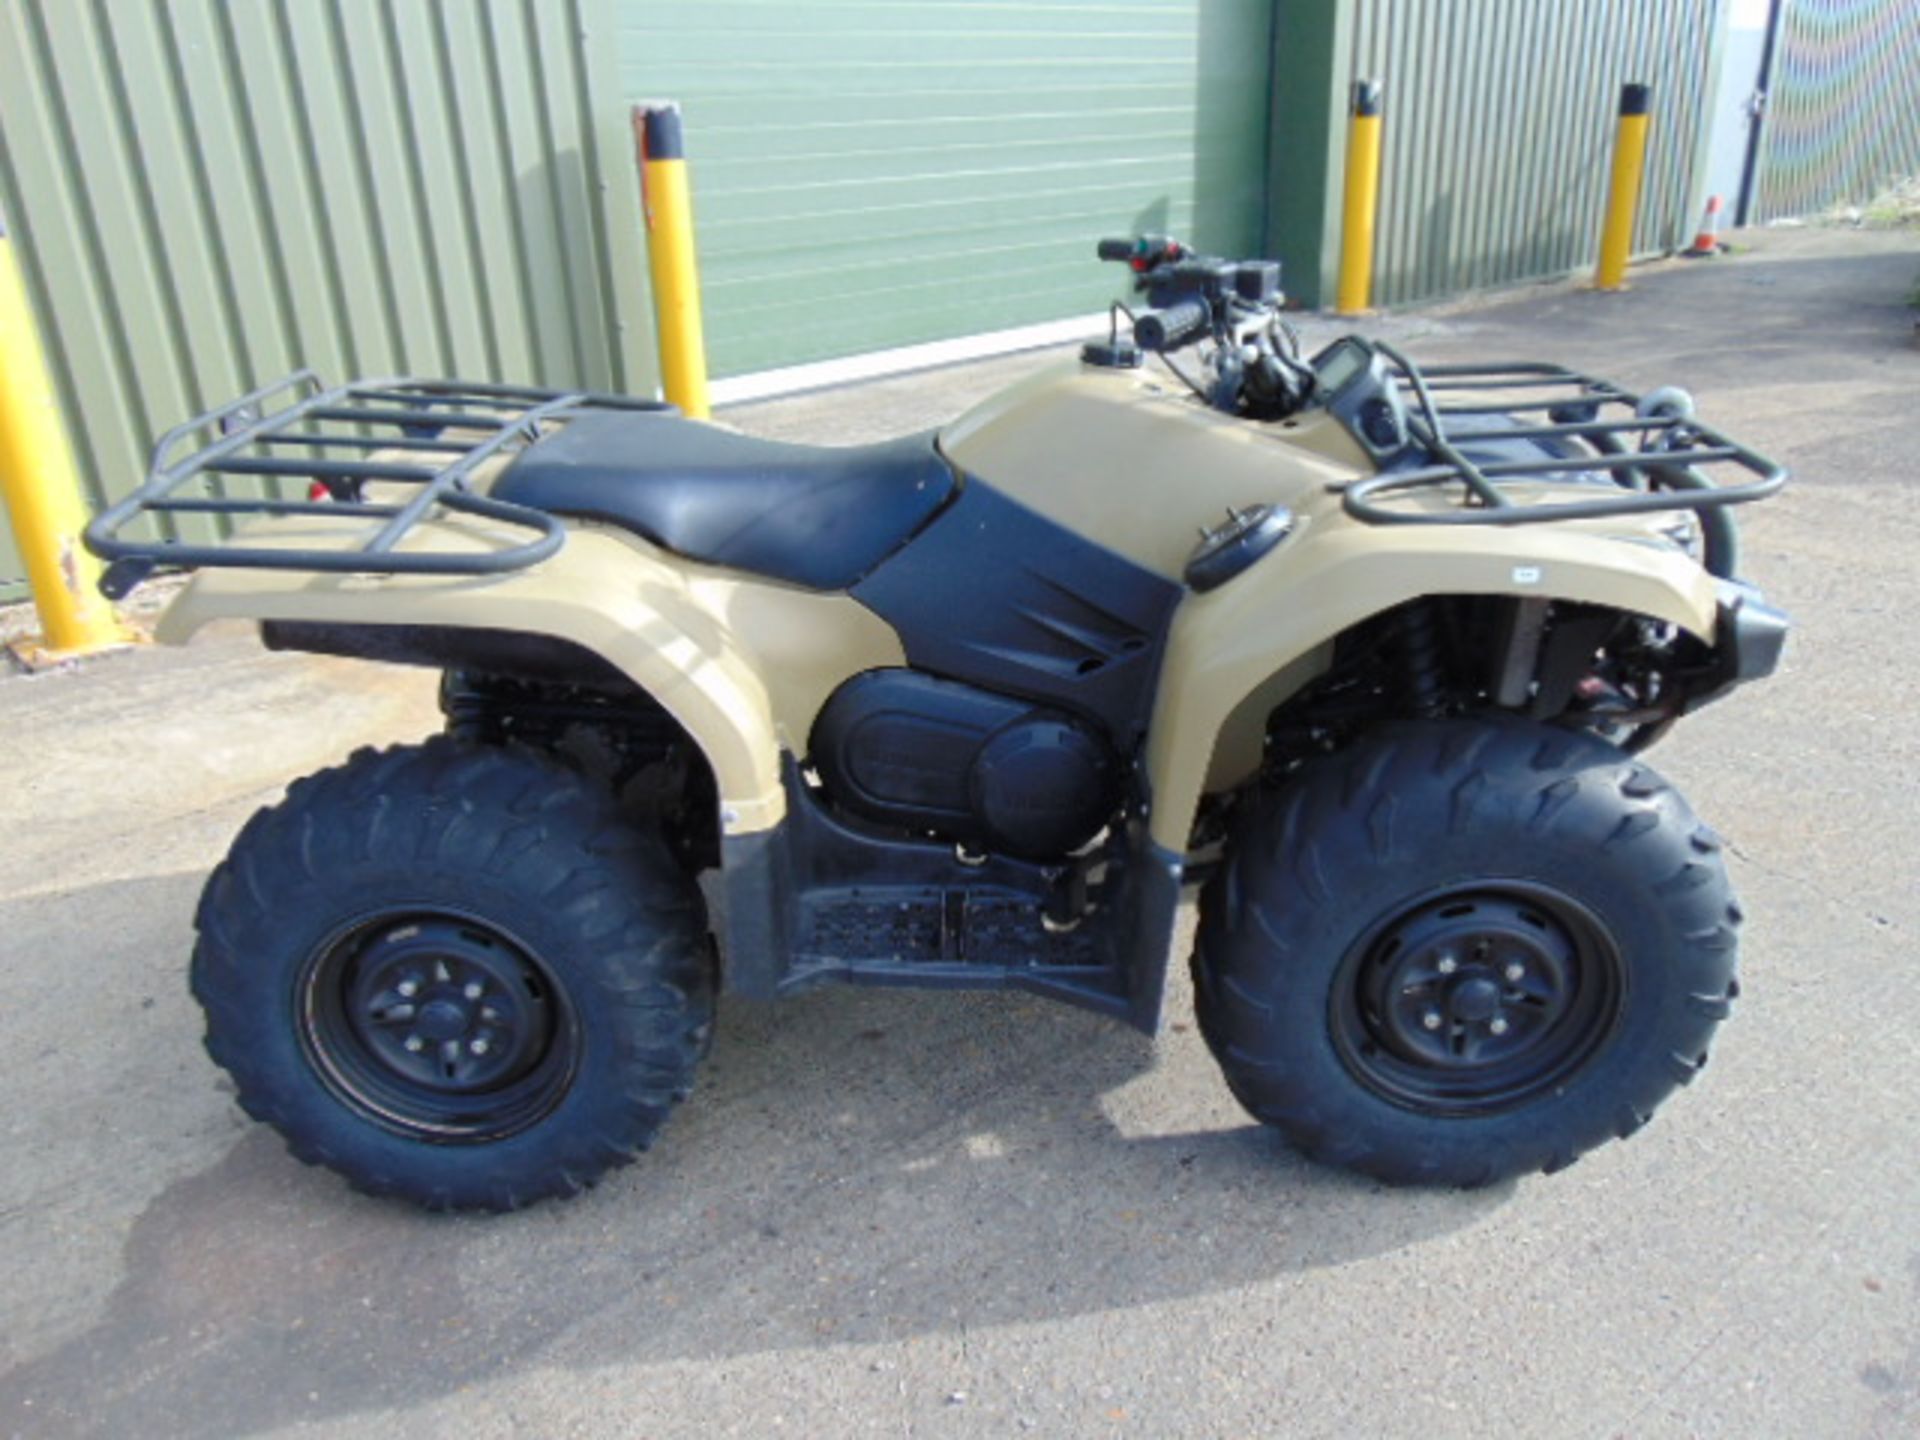 Military Specification Yamaha Grizzly 450 4 x 4 ATV Quad Bike Complete with Winch ONLY 130 HOURS! - Image 5 of 20